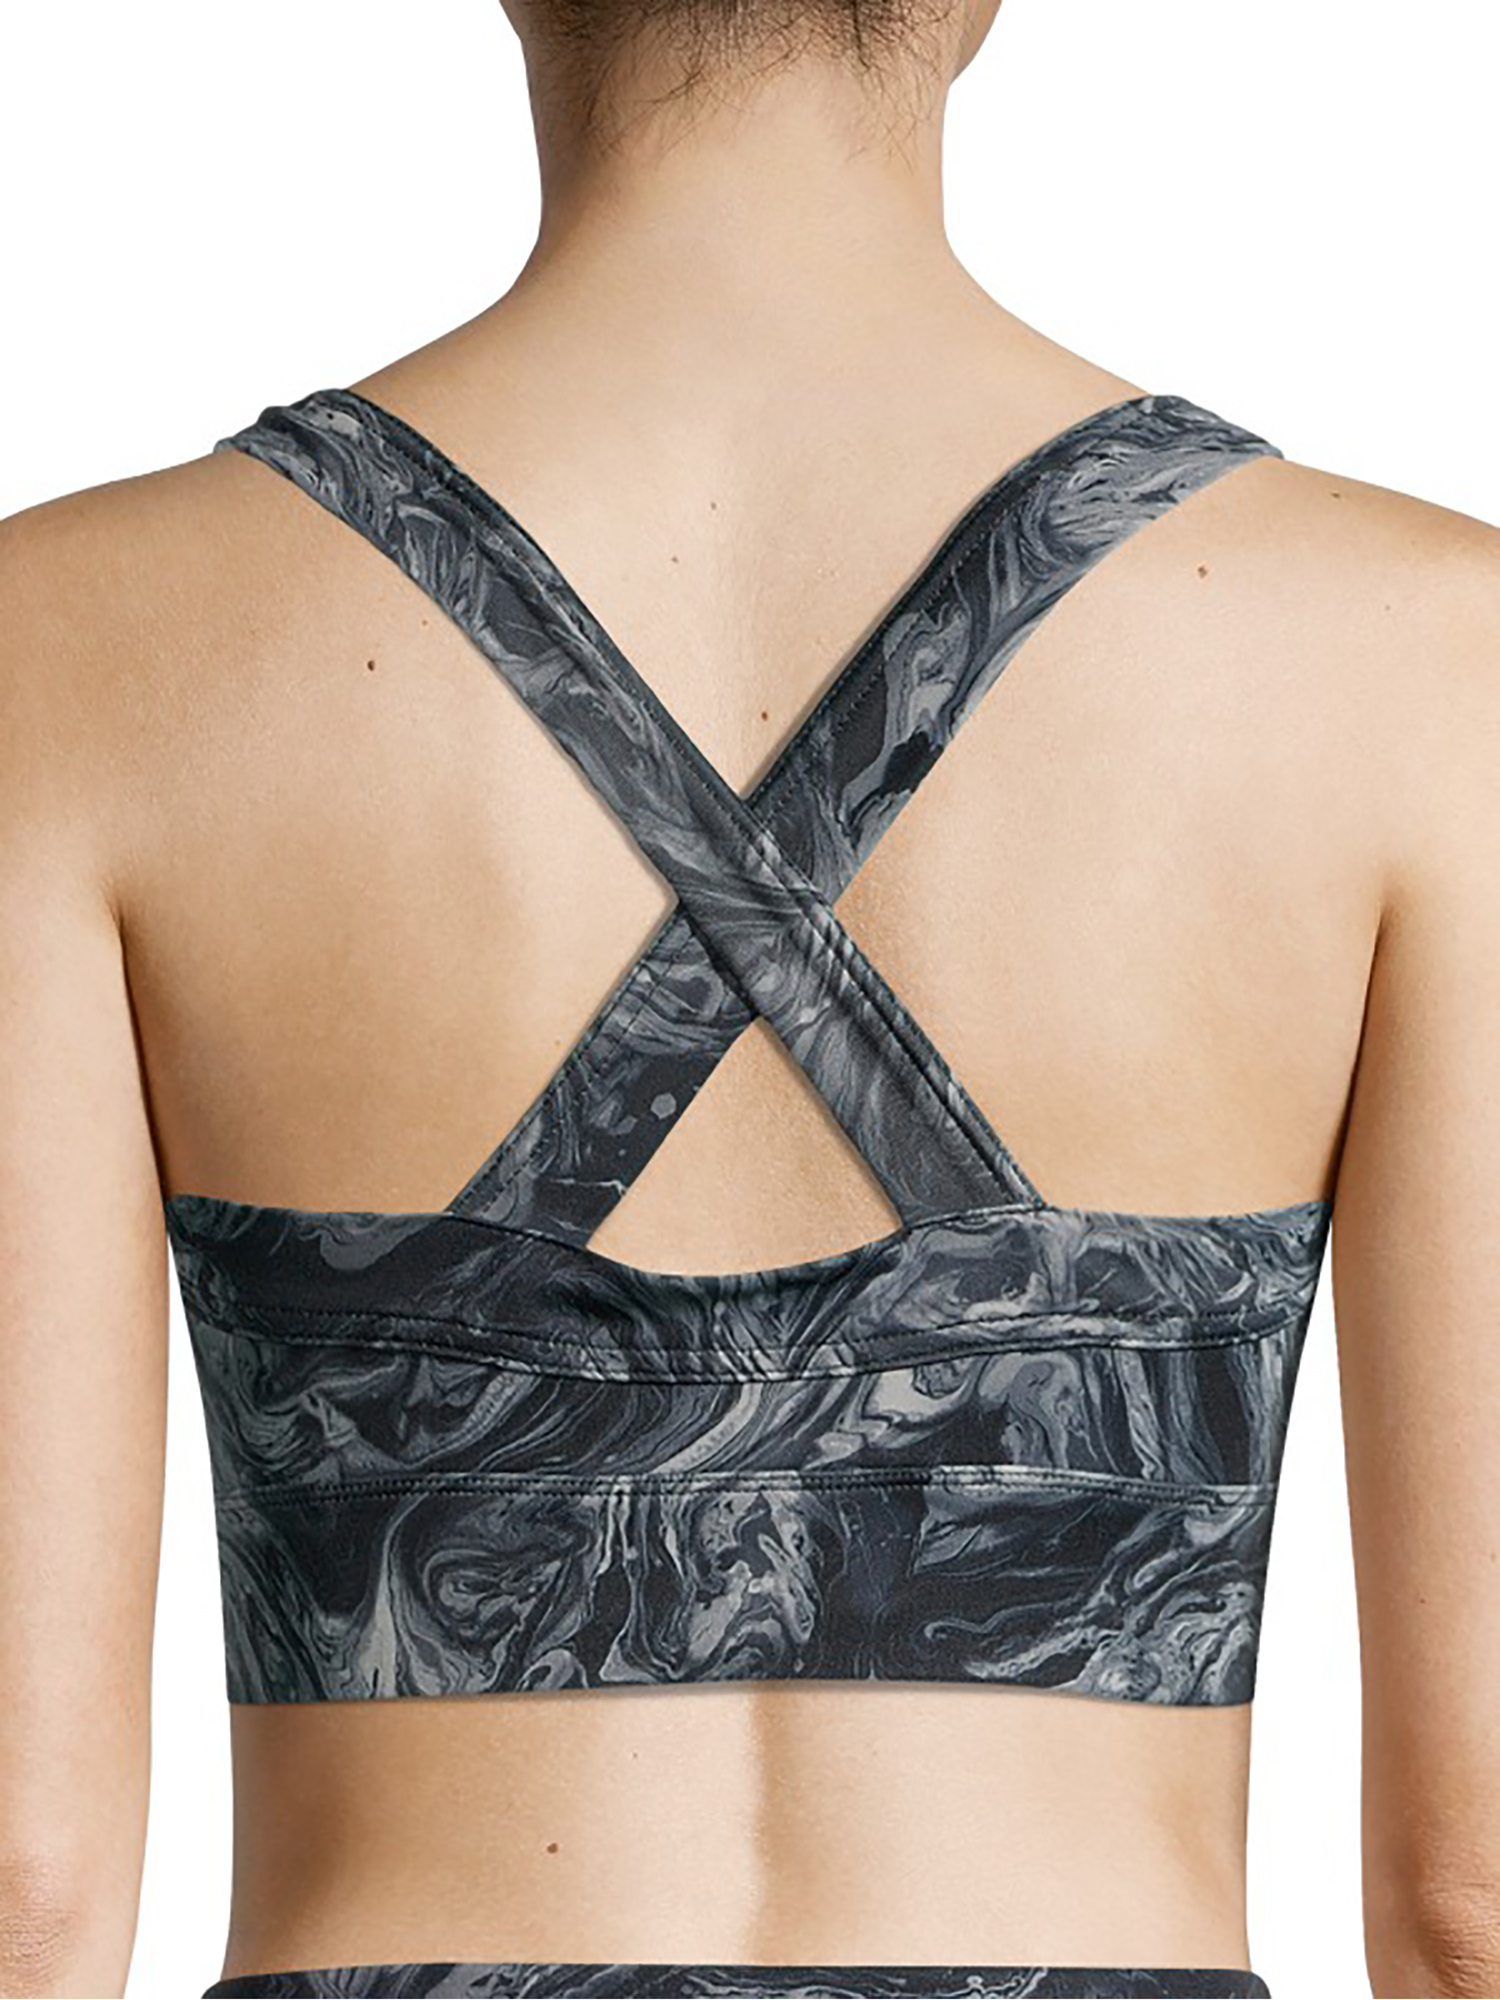 Athletic Works Support Low Impact Cross-Back Sports Bra (Women's) 1 Pack - image 2 of 7